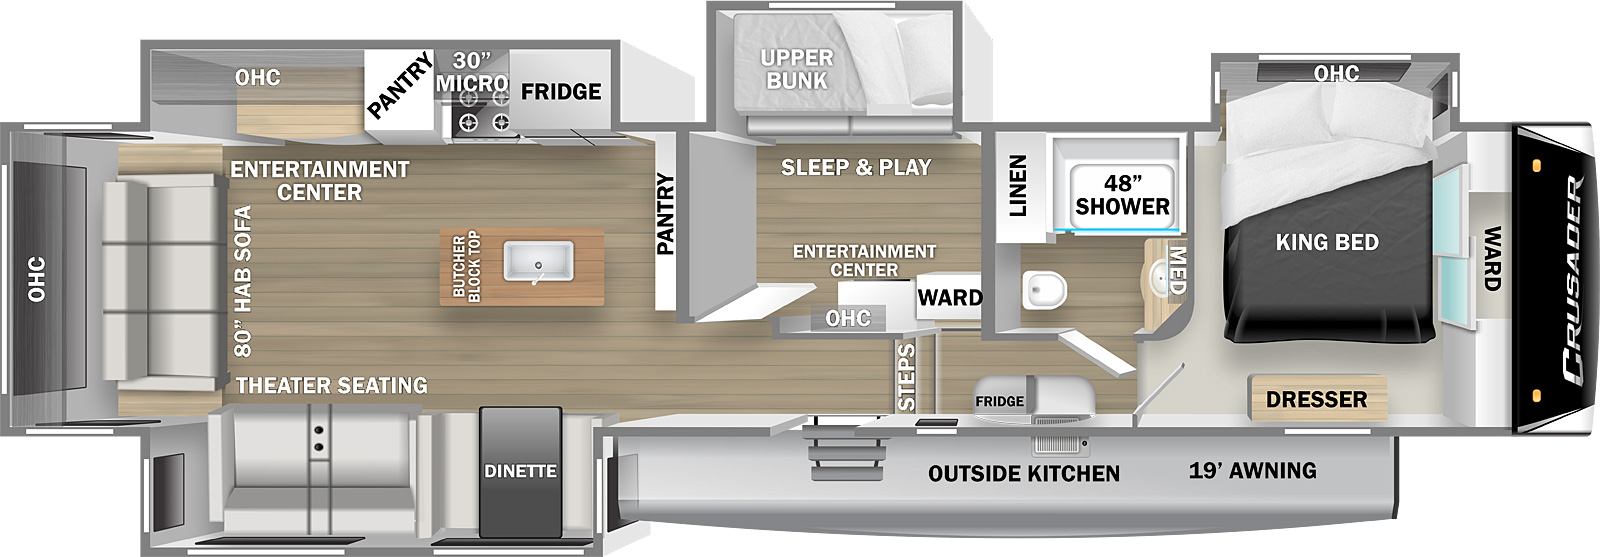 Crusader 382MBH floorplan. The 382MBH has 4 slide outs and one entry door.